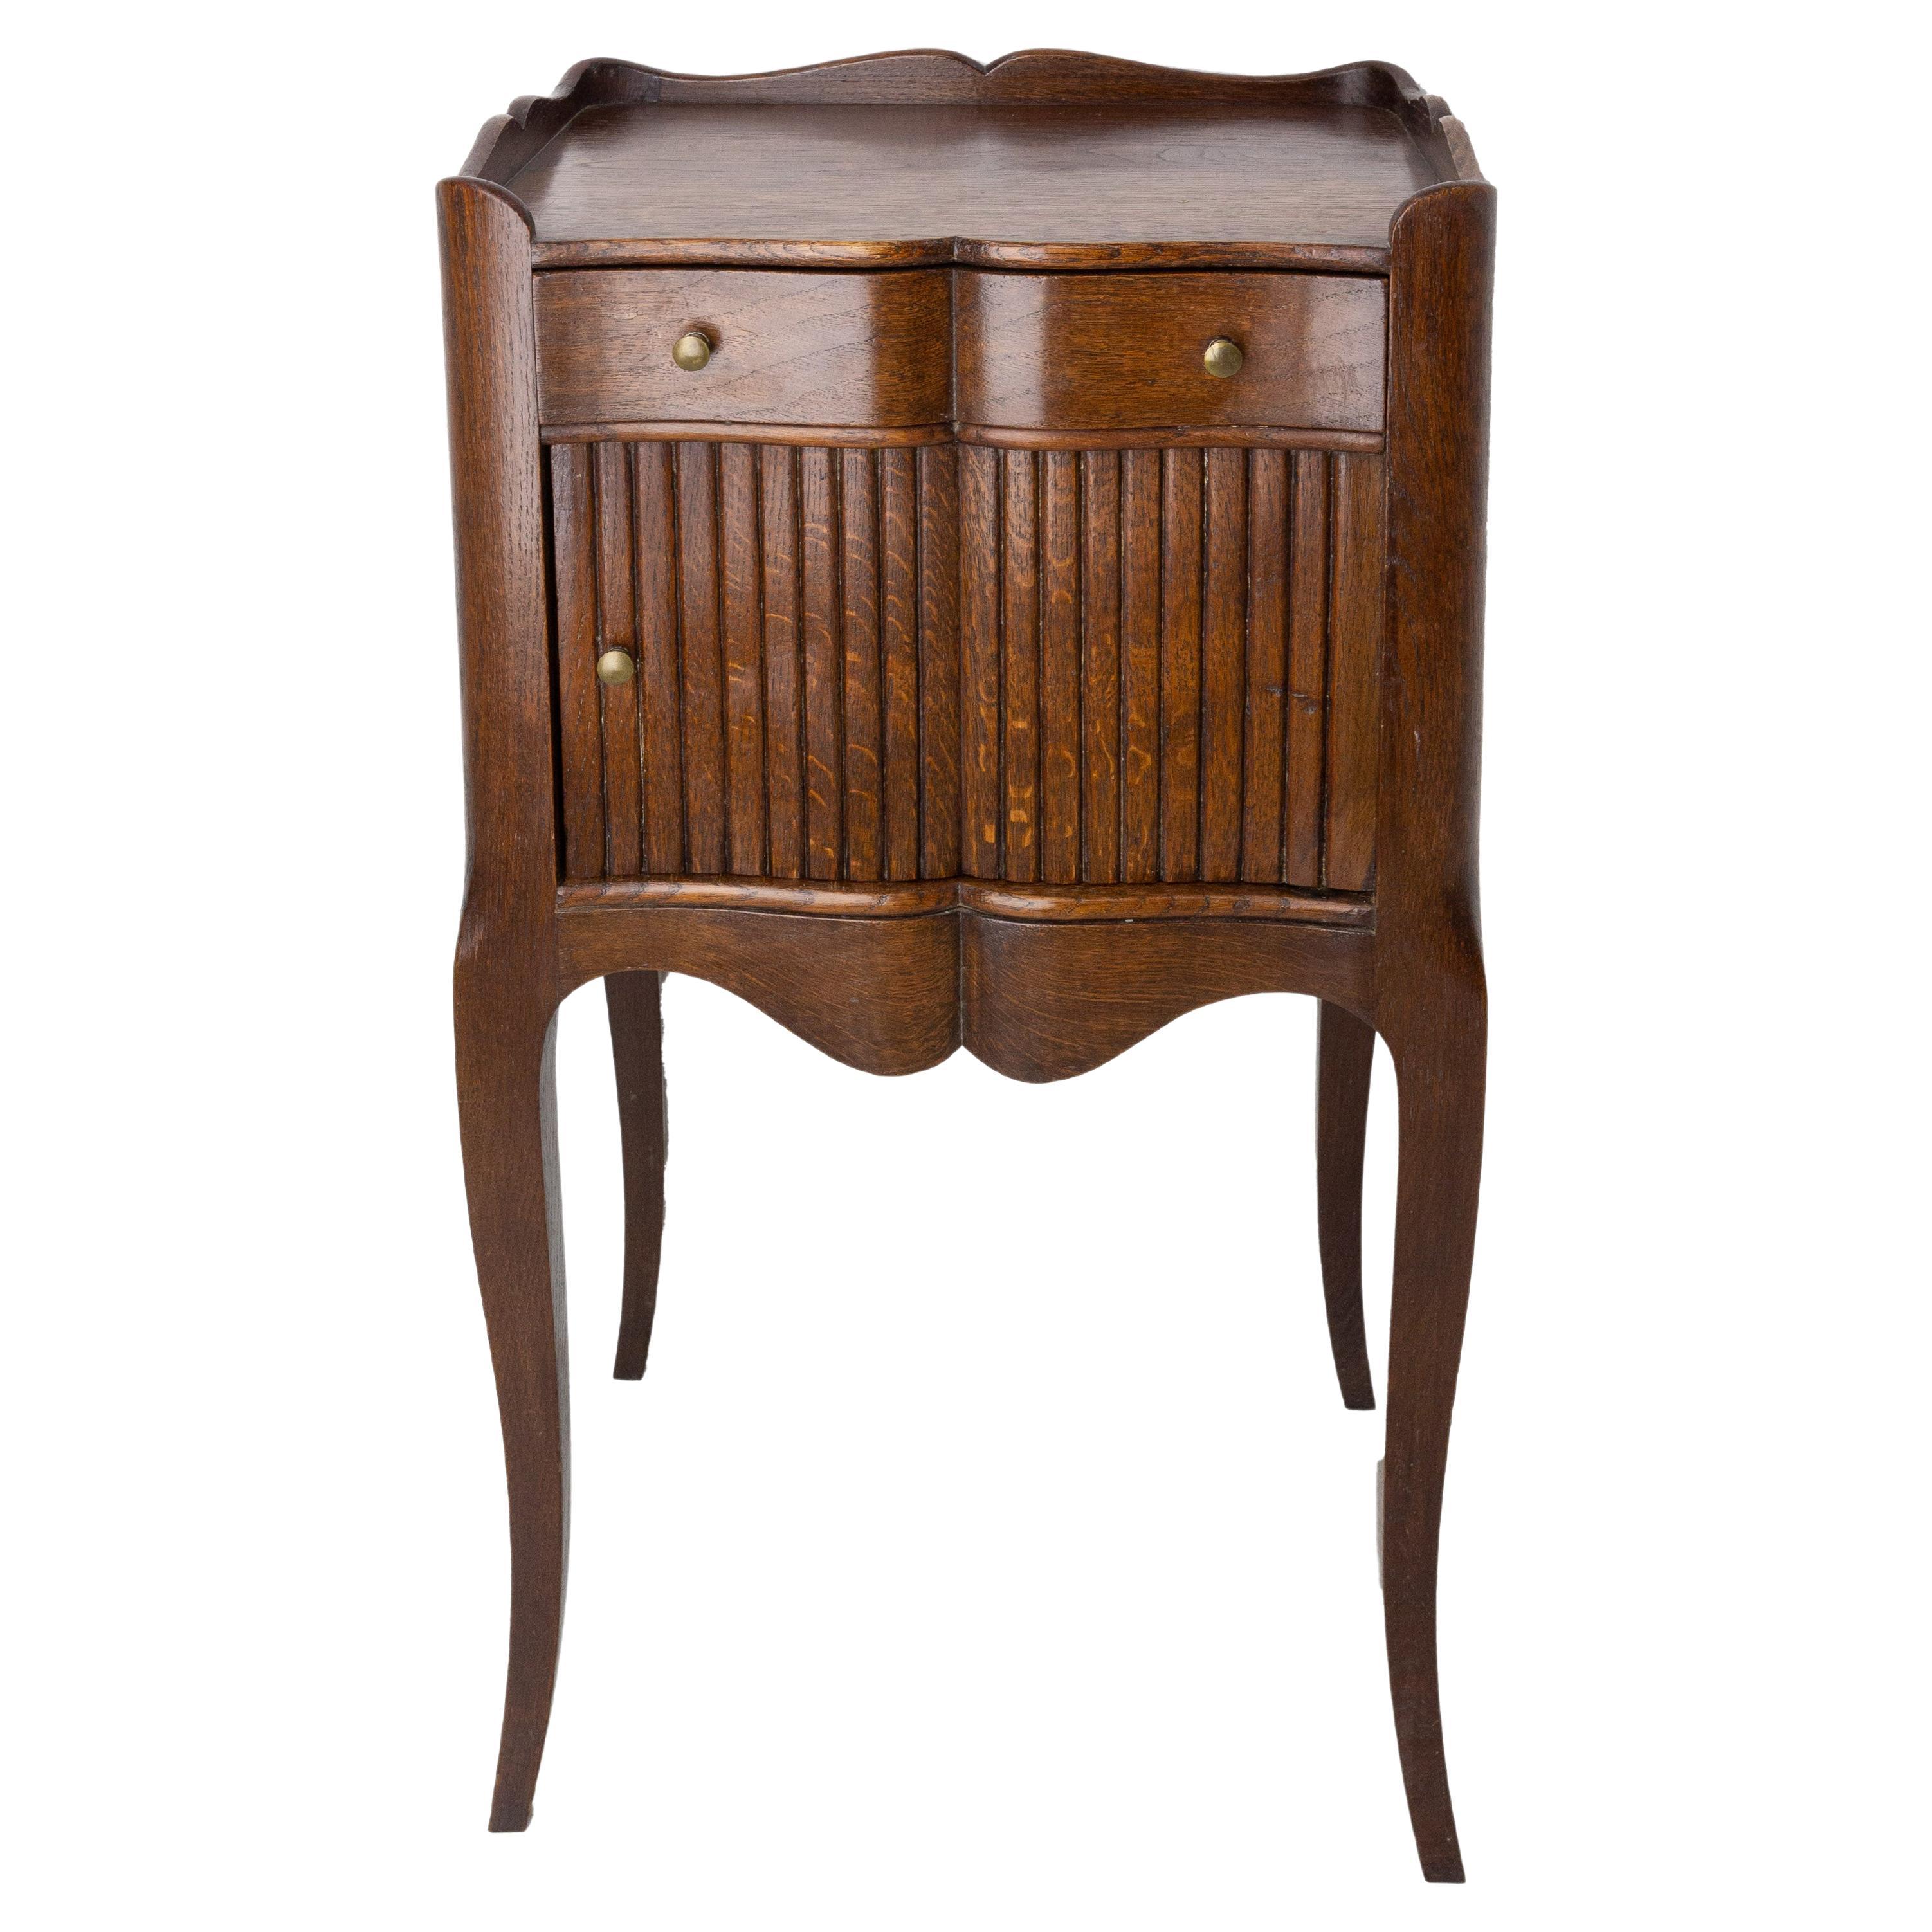 Louis XV Style Side Cabinet Nightstand French Oak Bedside Table, circa 1920